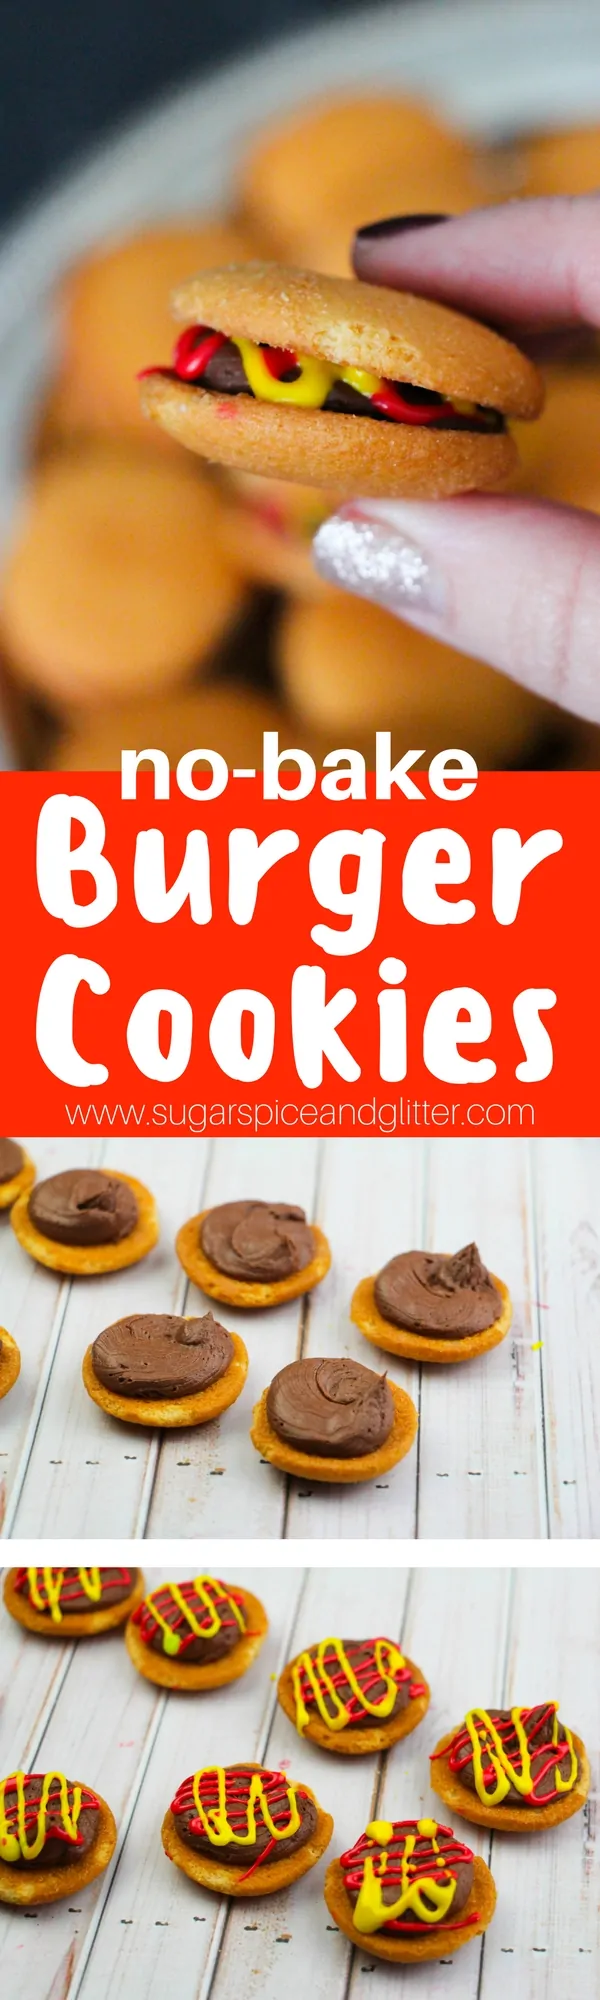 Fun no-bake burger cookies - a bite-sized dessert perfect for a BBQ or kids' party. Set up a mini "toppings" bar for kids to make themselves